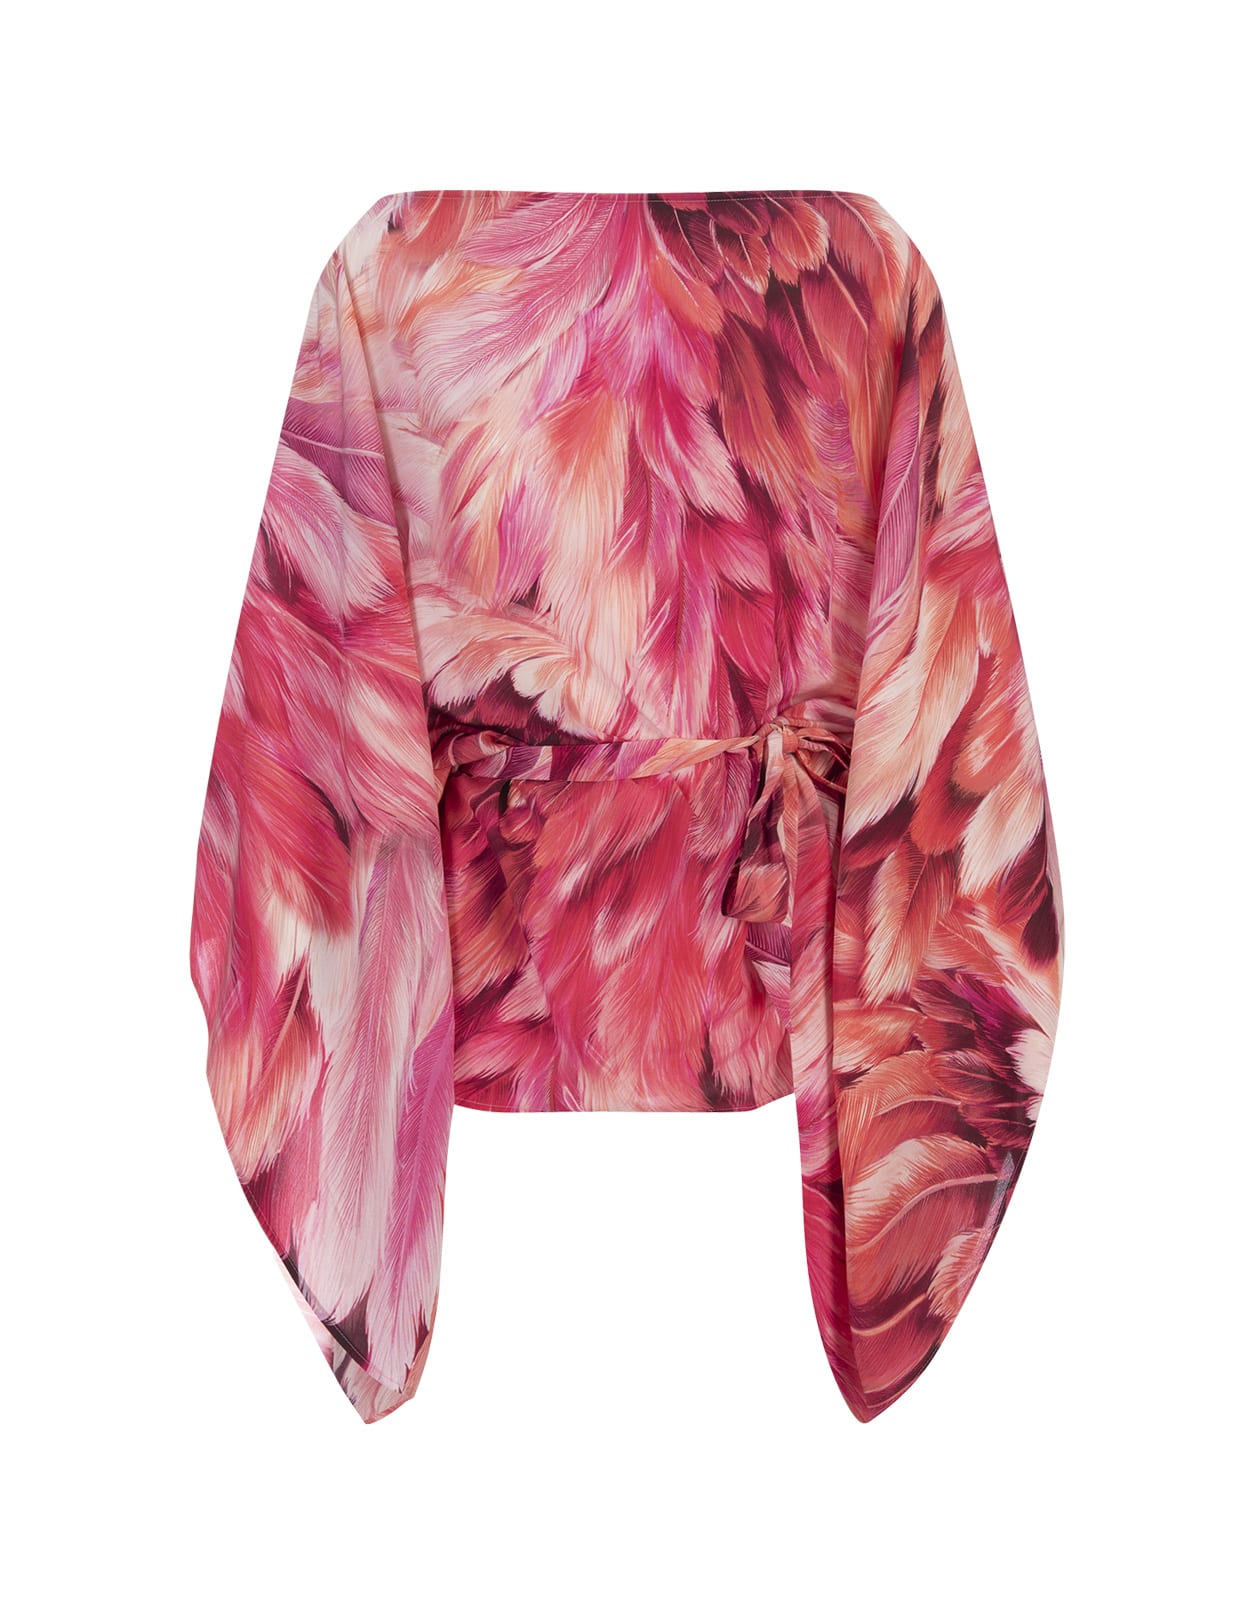 Short Caftan With Plumage Print In Pink